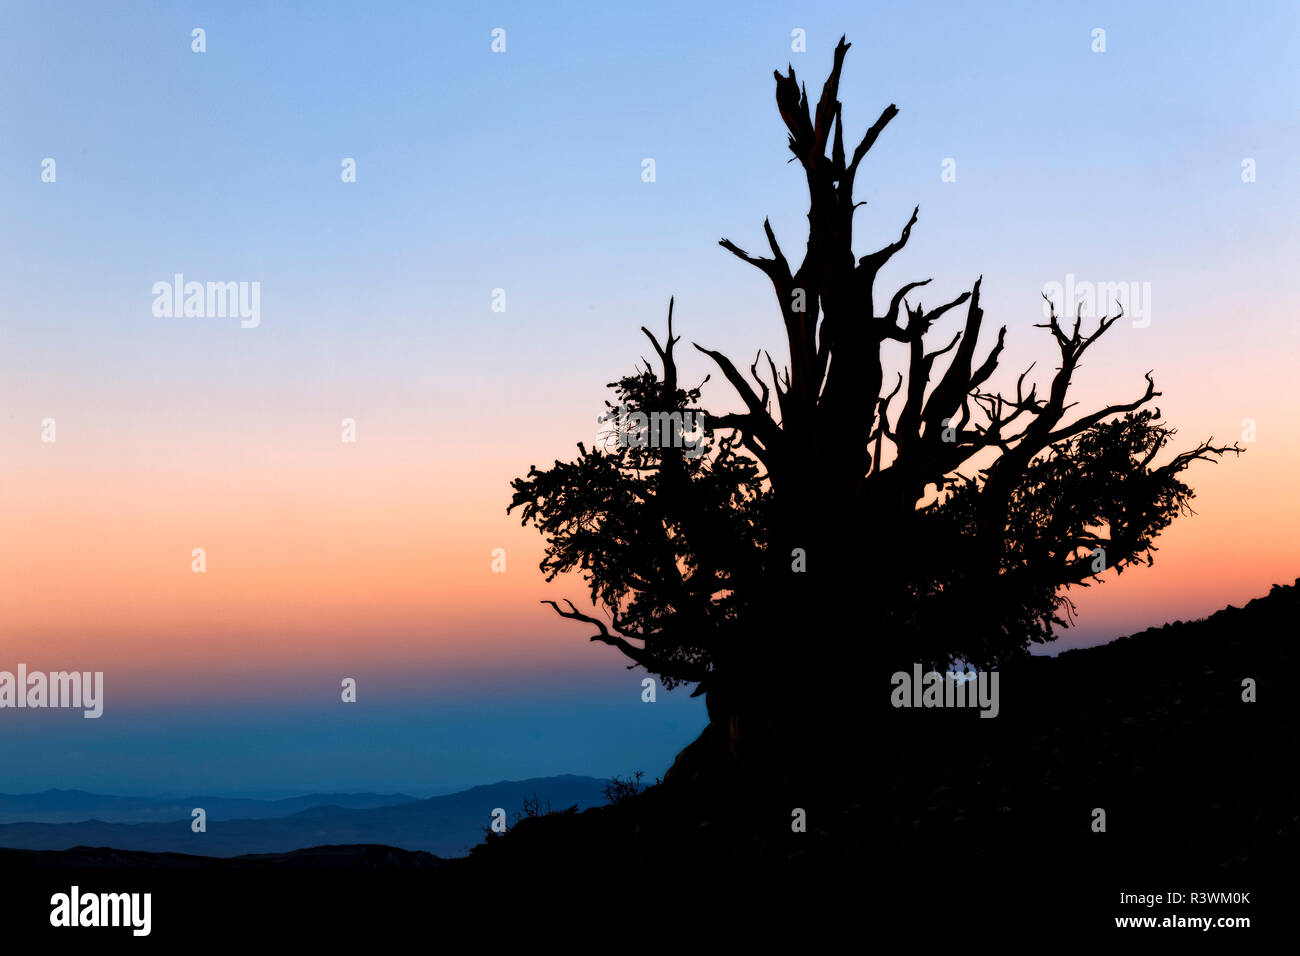 Ancient bristlecone pine tree at sunset, White Mountains, Inyo County, California. Great Basin National Park Stock Photo